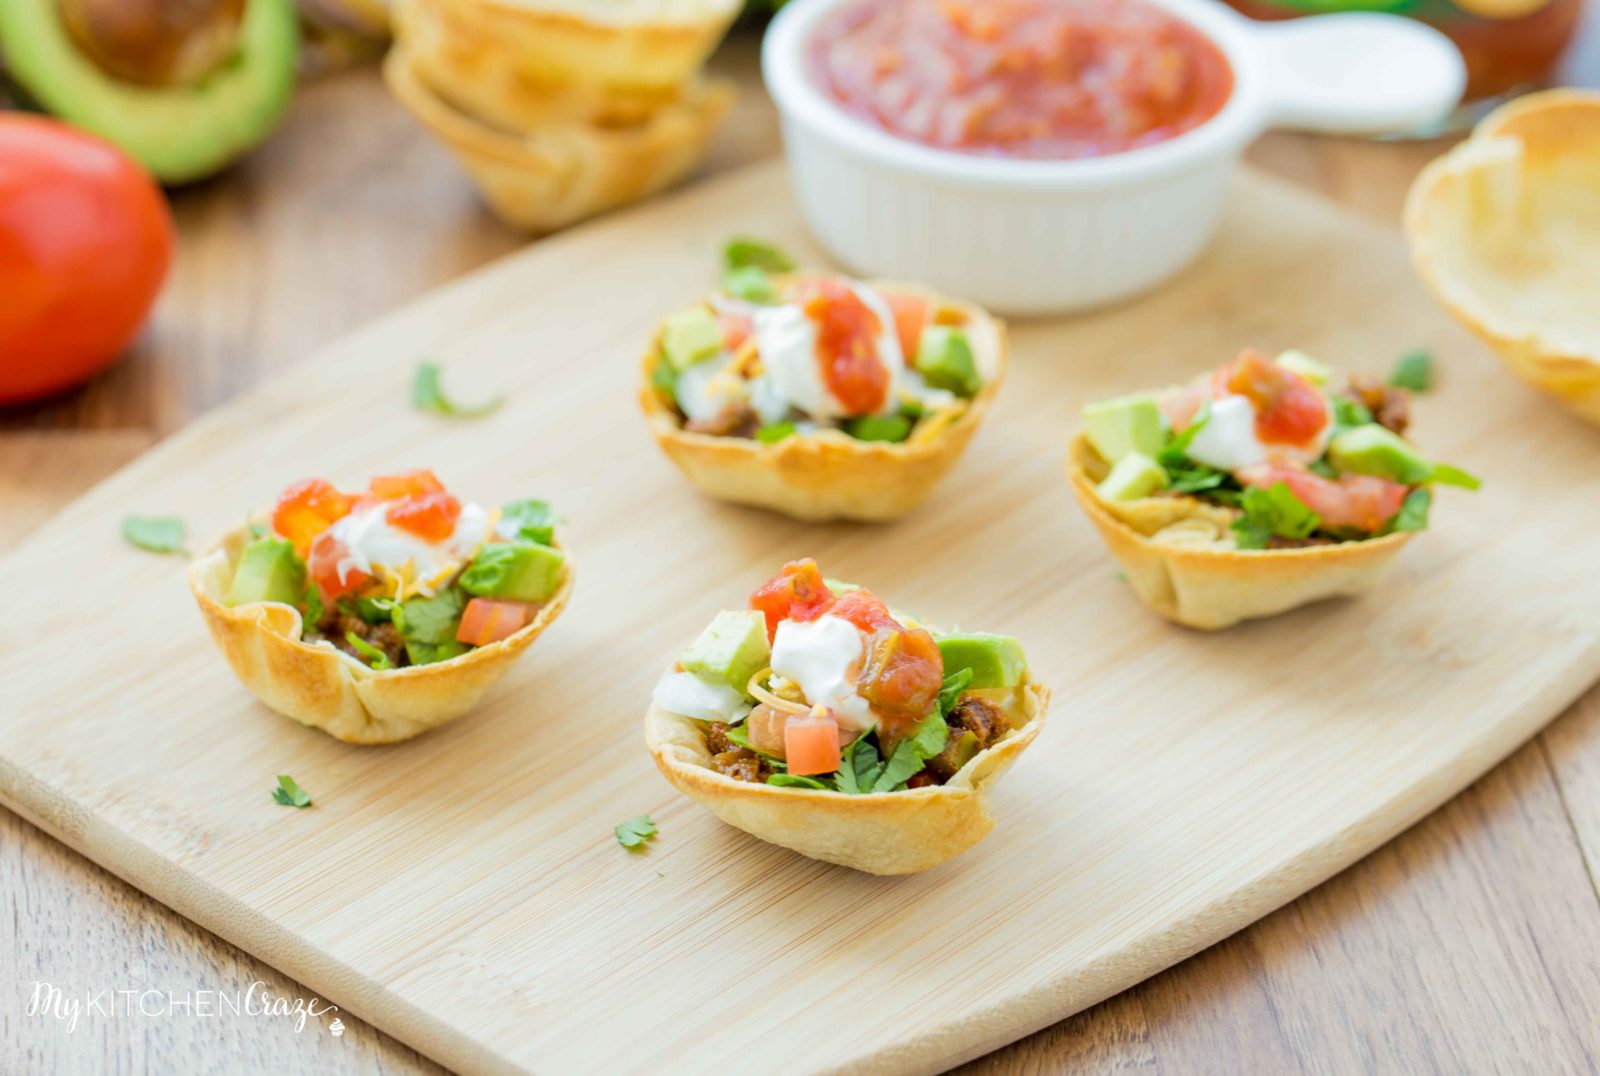 Taco Cups & Cheese Dip {Game Day Food} ~ Do you love to have snacks and appetizers on game day? Then you need to make these delicious Taco Cups and creamy Cheese Dip. Perfect foods to cheer on your favorite team. Go team!